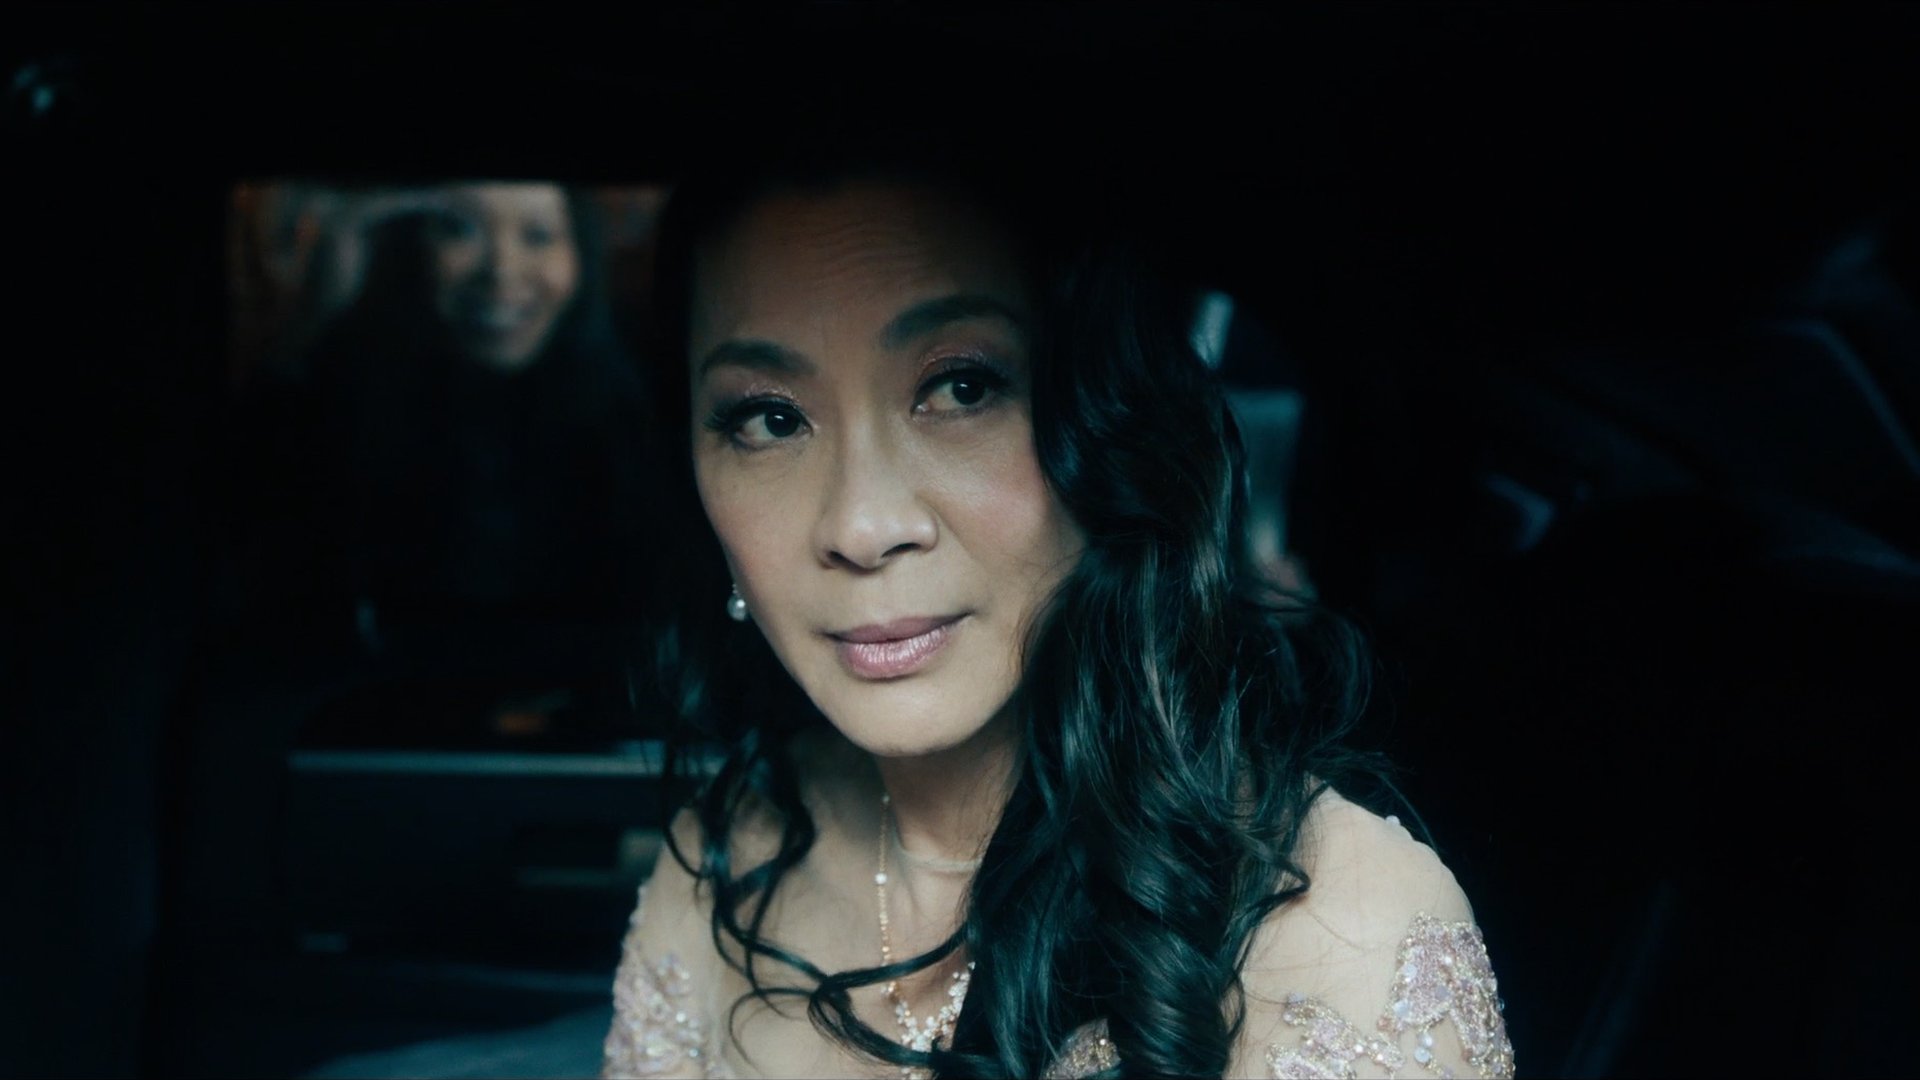 Michelle Yeoh wants a seat at Hollywood